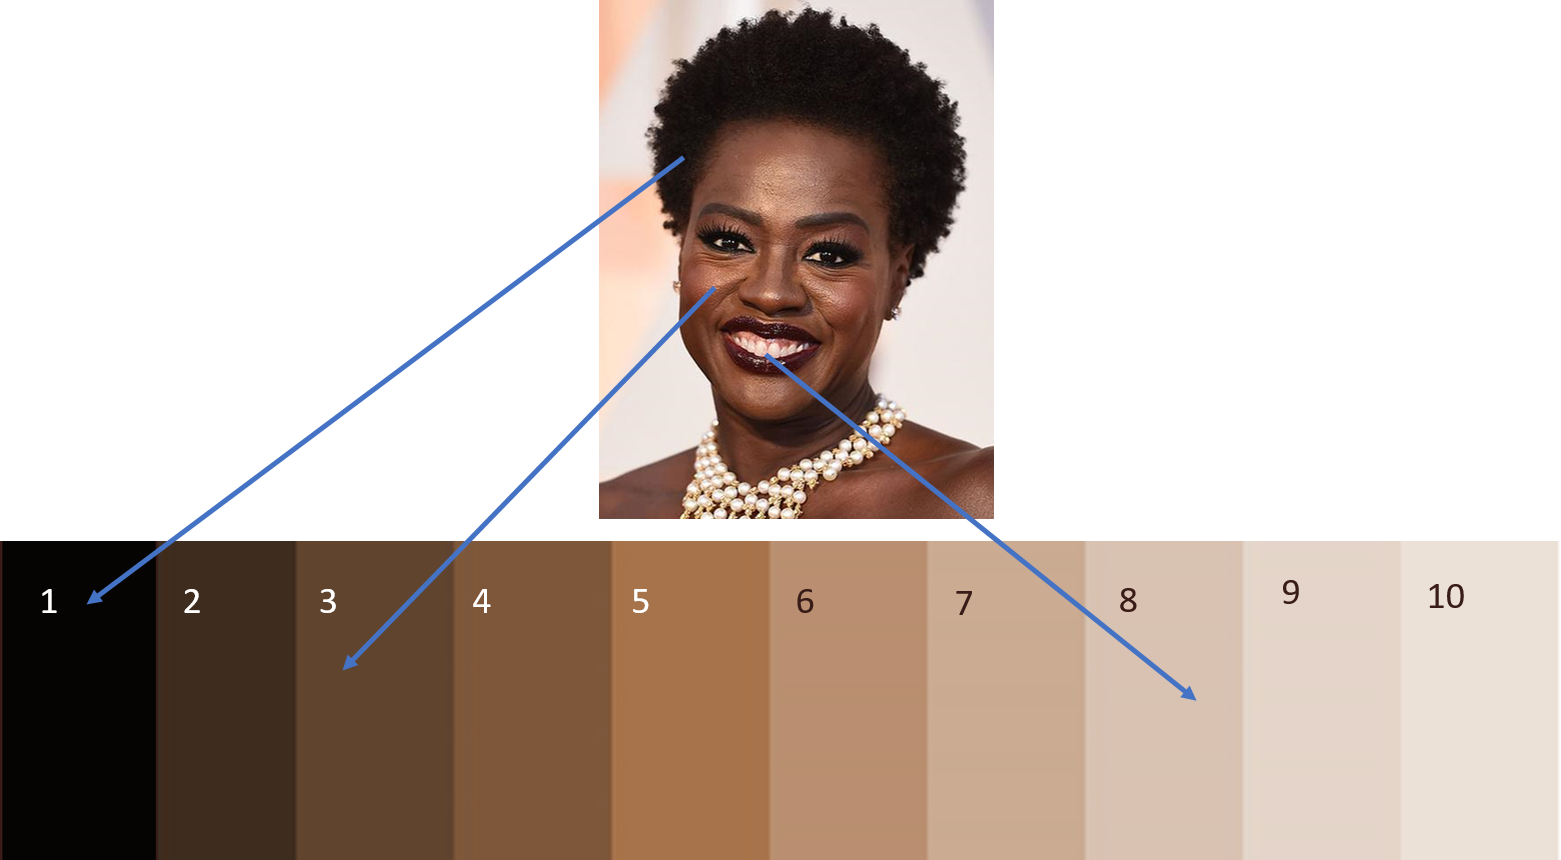 Understanding value, colour contrast and value contrast with darker skin tones